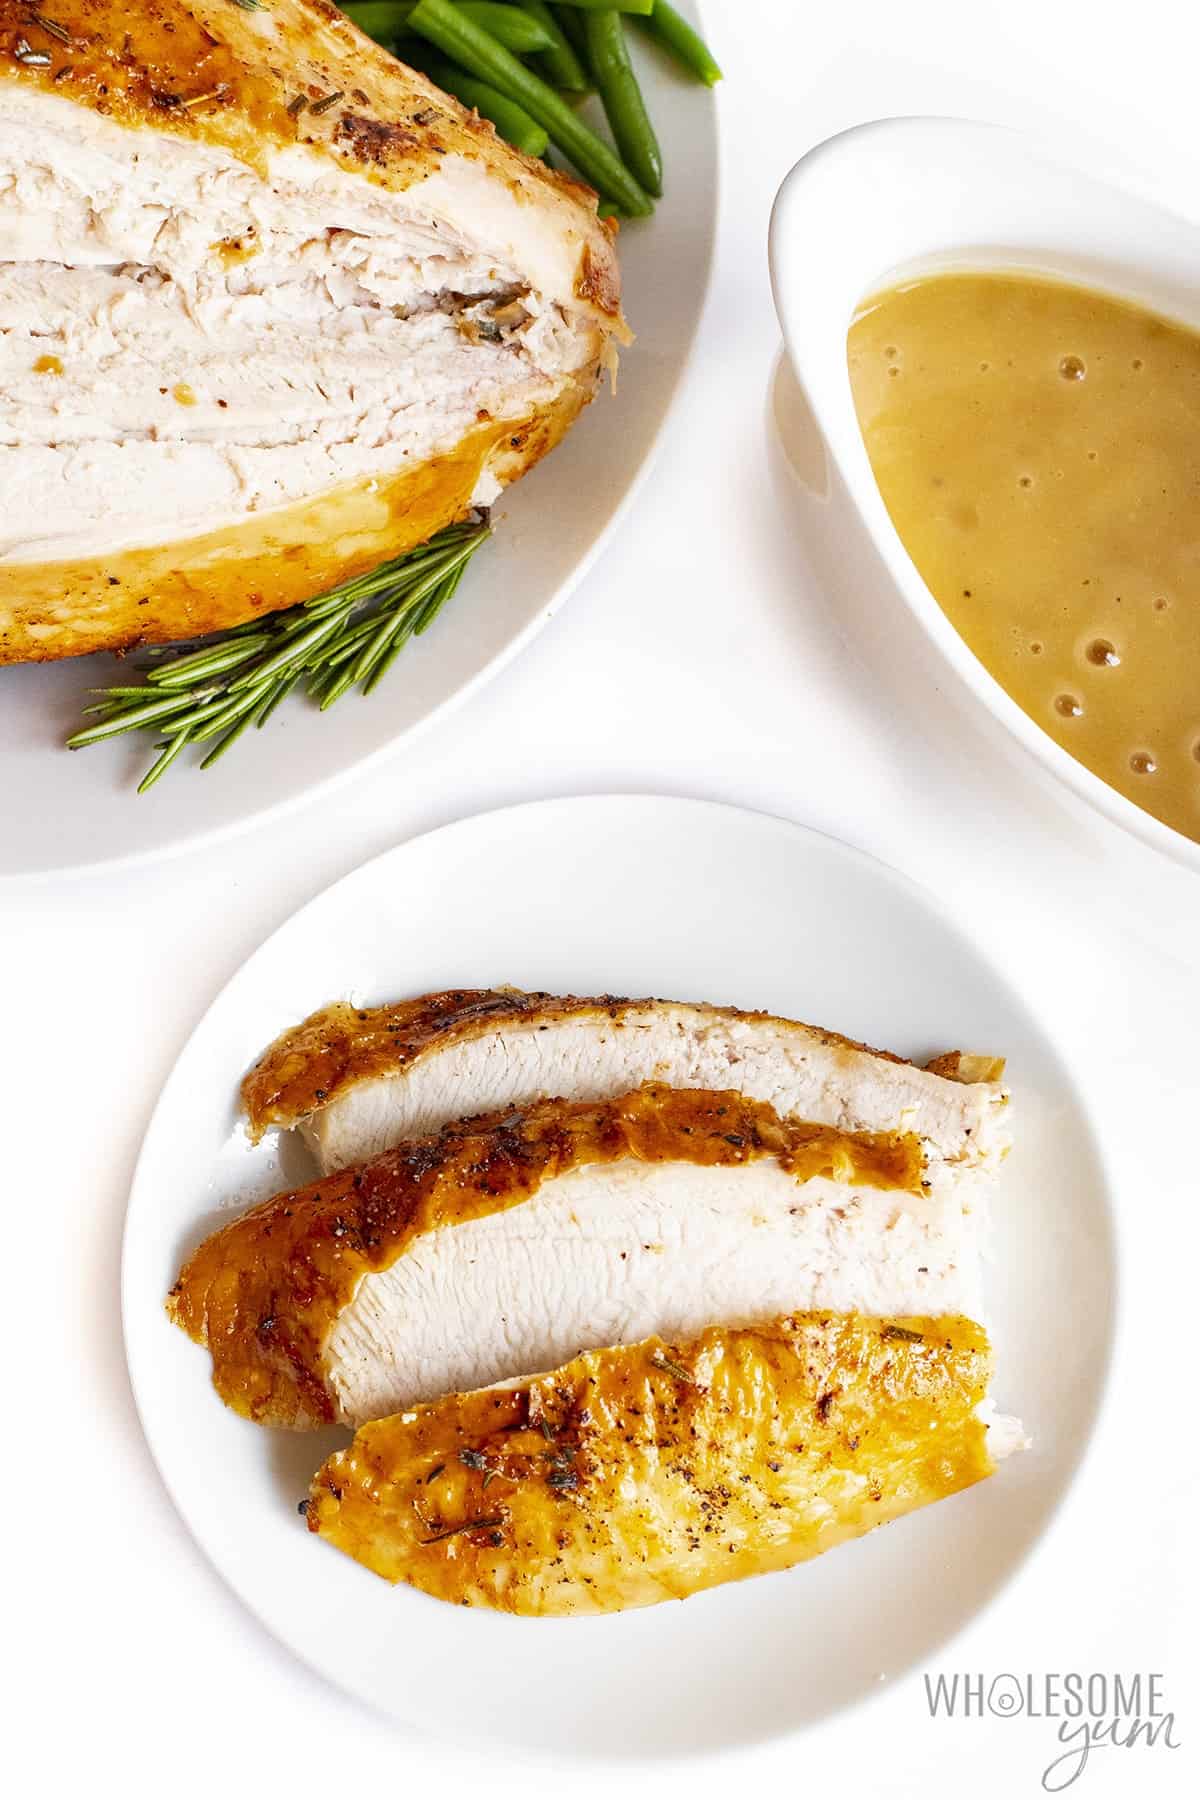 Turkey breast on a plate with gravy